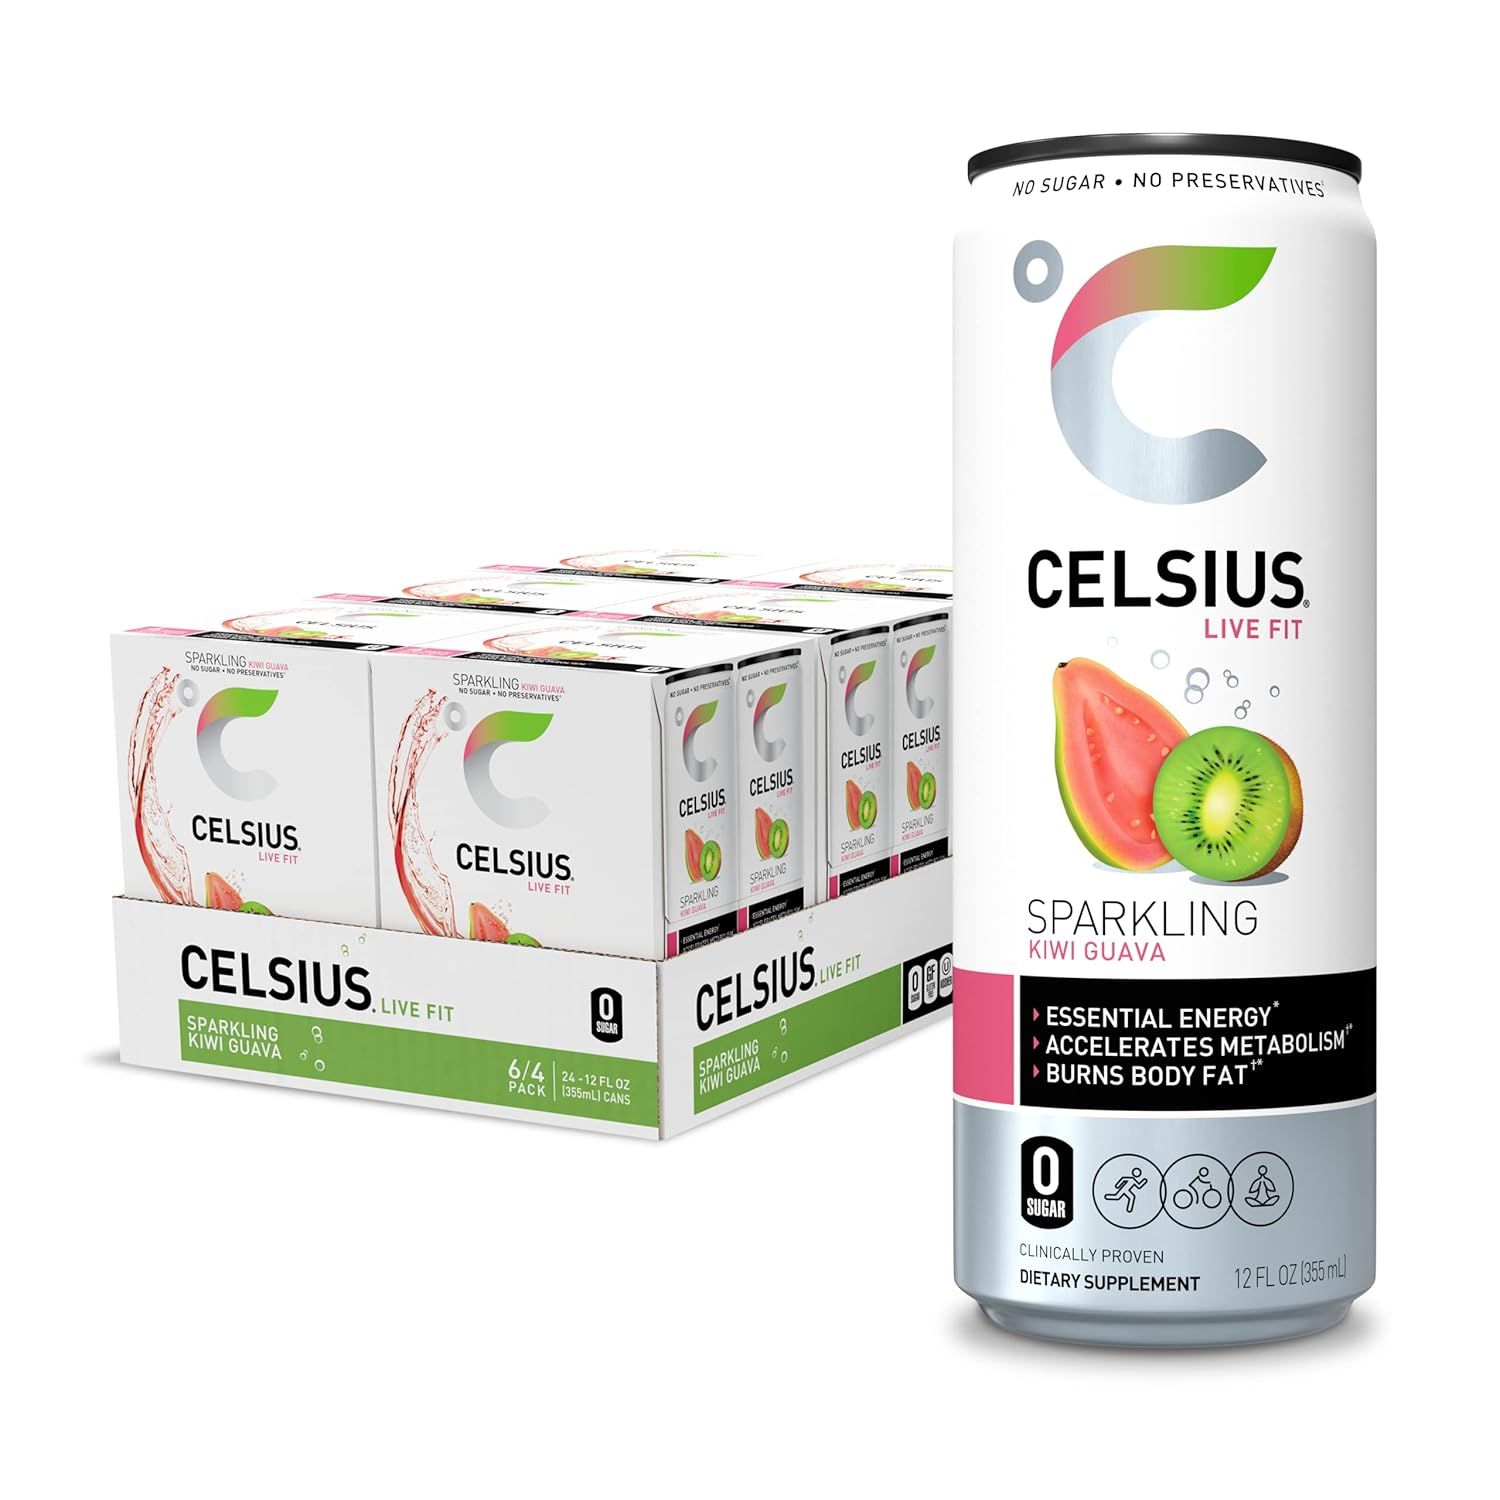 CELSIUS Sparkling Kiwi Guava, Functional Essential Energy Drink 12 Fl Oz (Pack of 24) | Amazon (US)